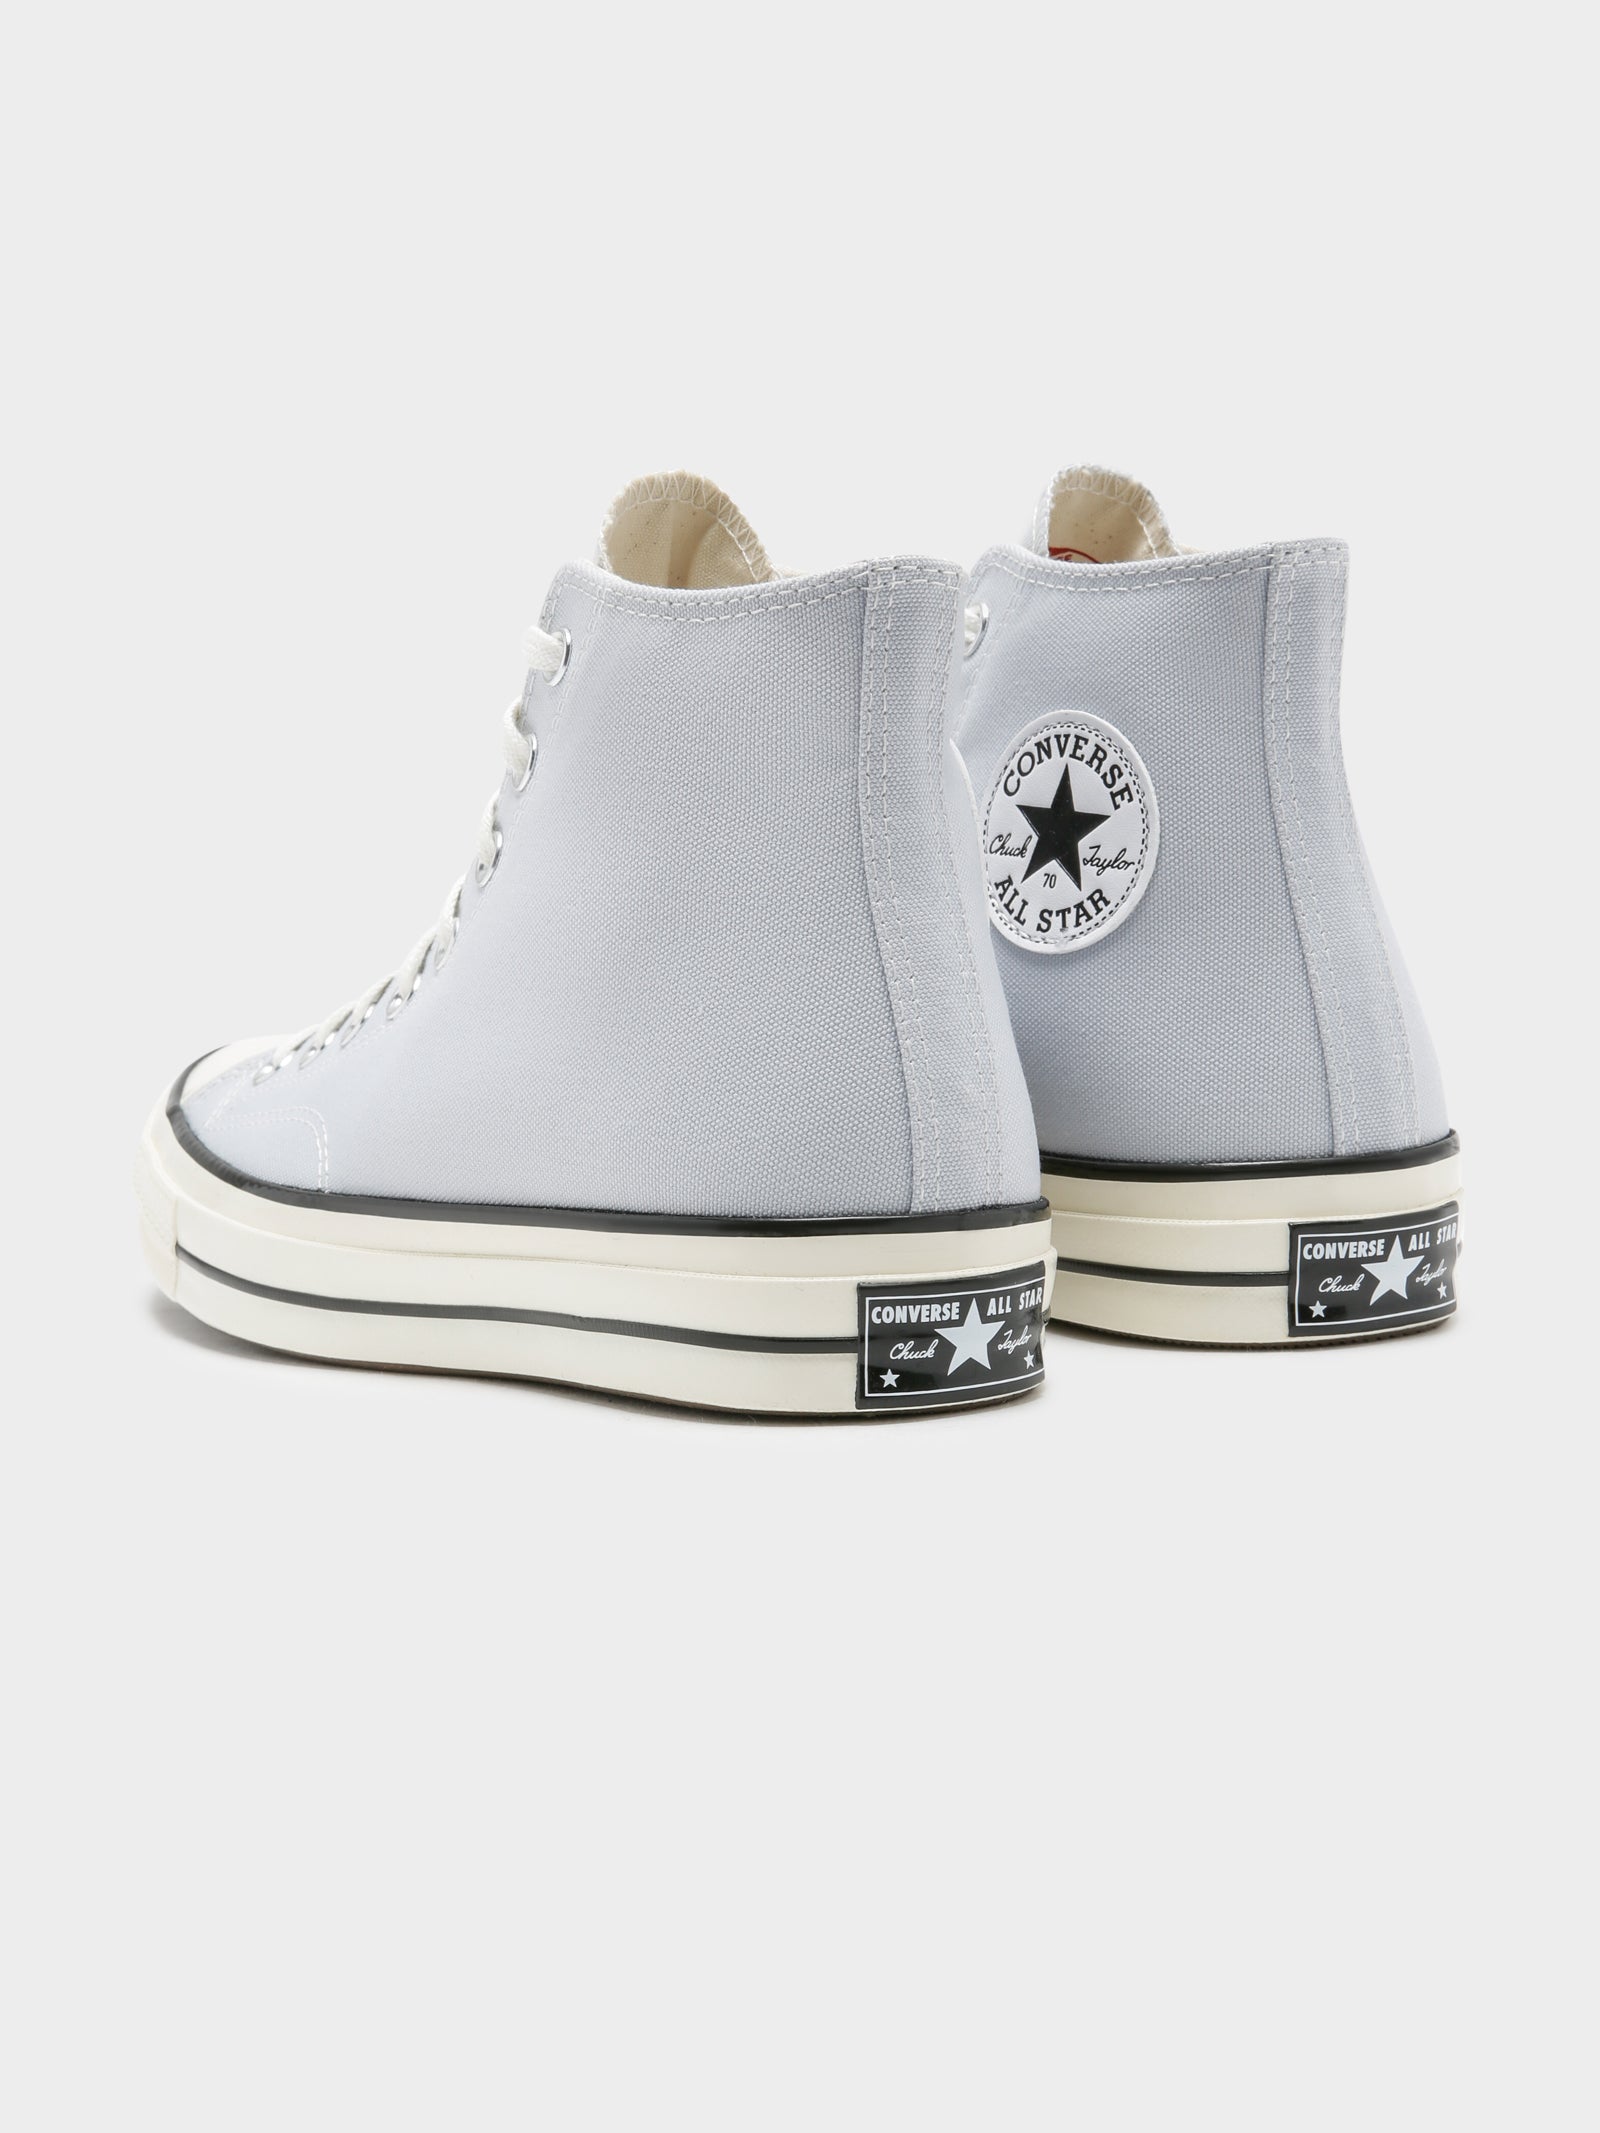 Unisex Chuck 70 High Sneakers in Summit Grey